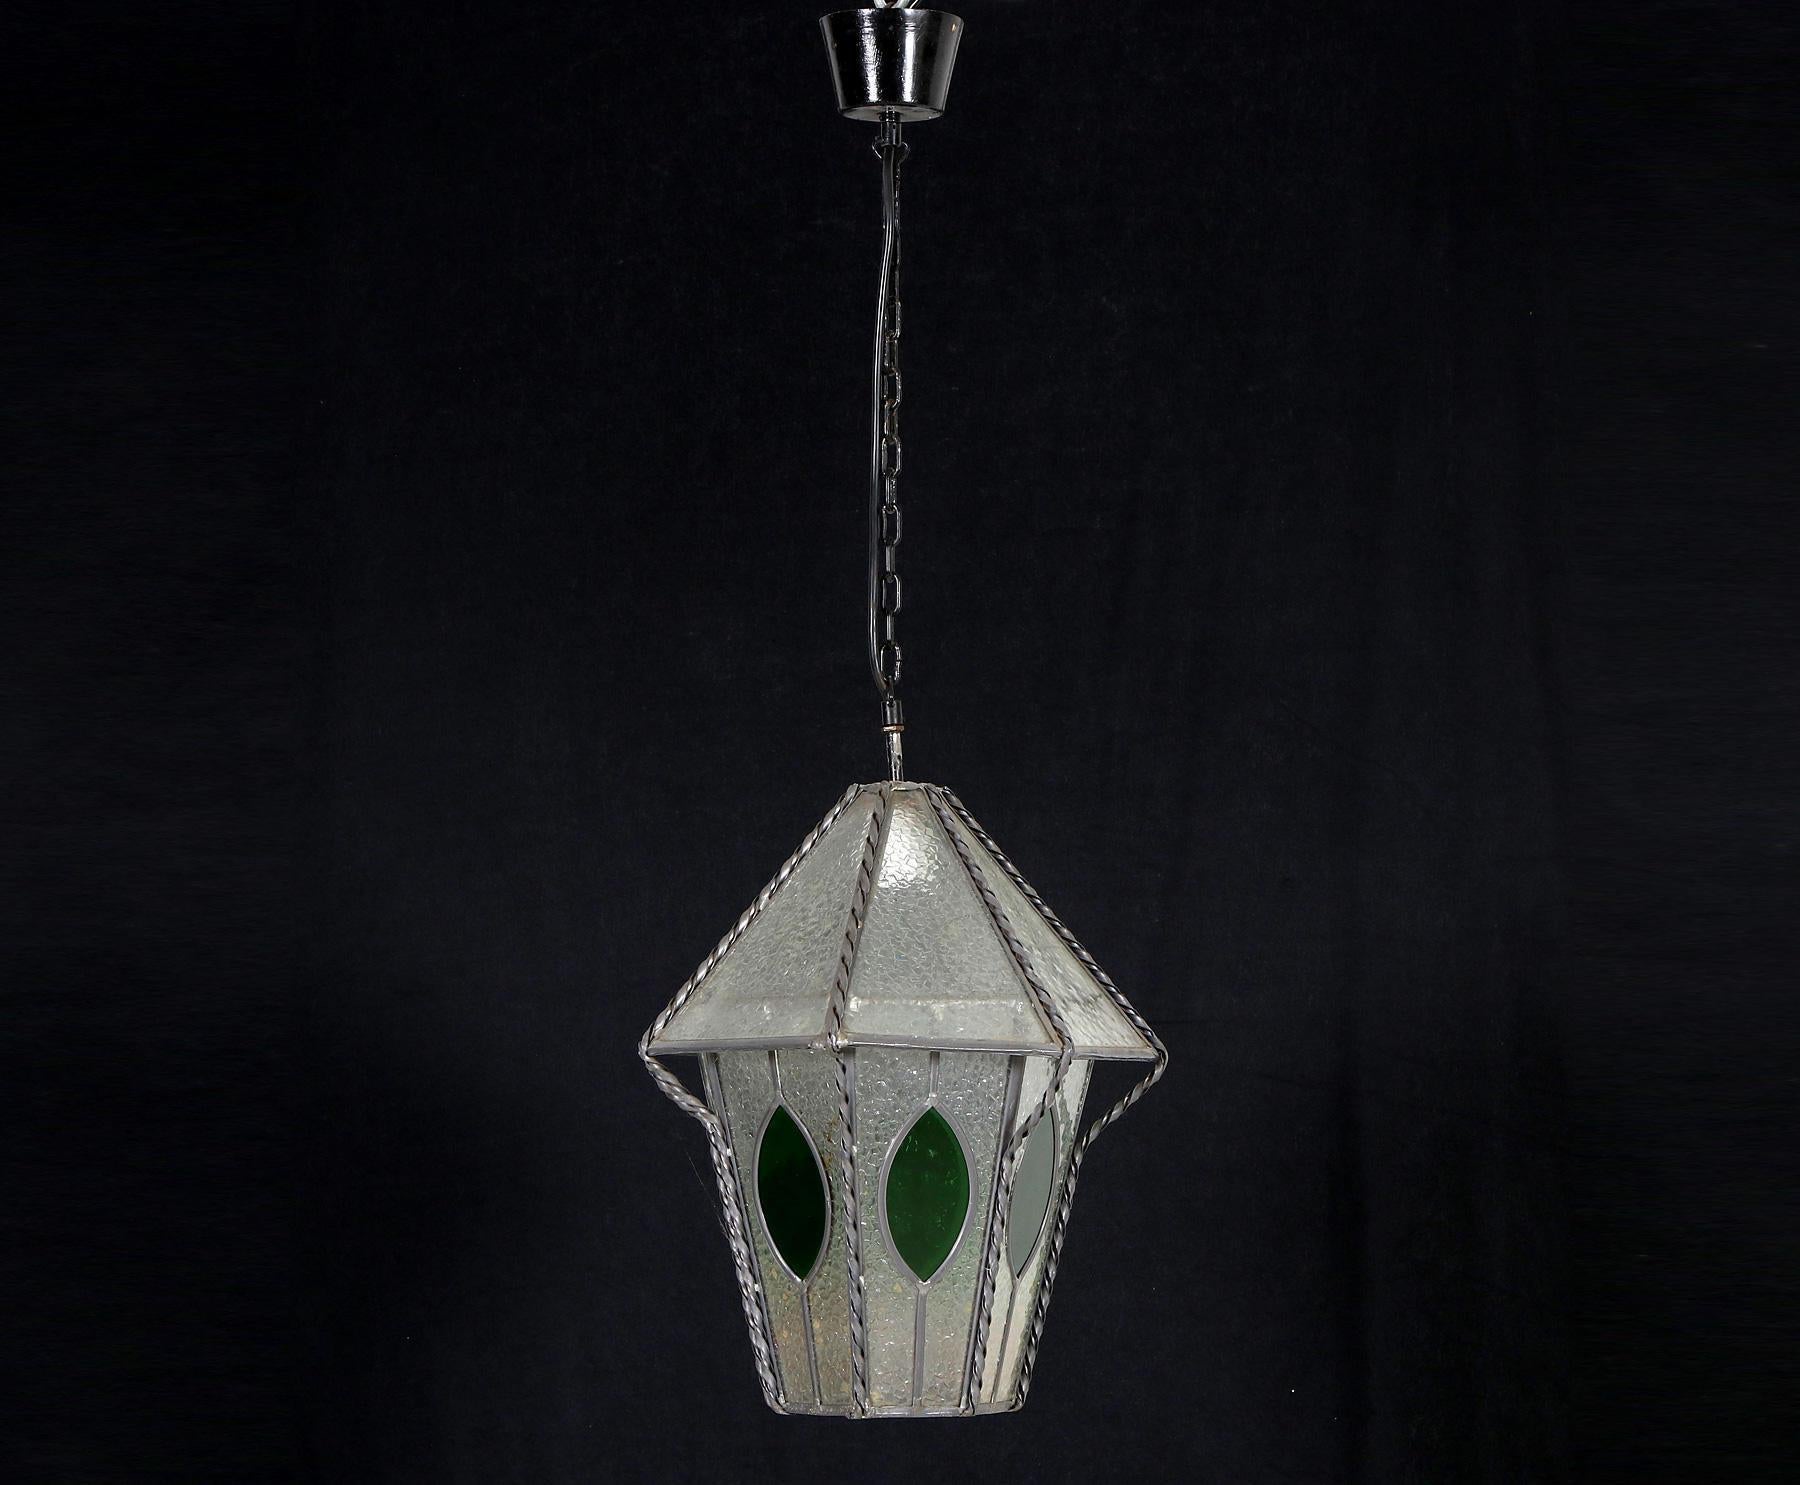 Art Nouveau lantern made in Germany circa 1950, glazed body, decorated with green colored and ornamented glass, electrified and fitted with one E27 socket, some signs of age and wear,
Measure: Height approximate 50 cm.